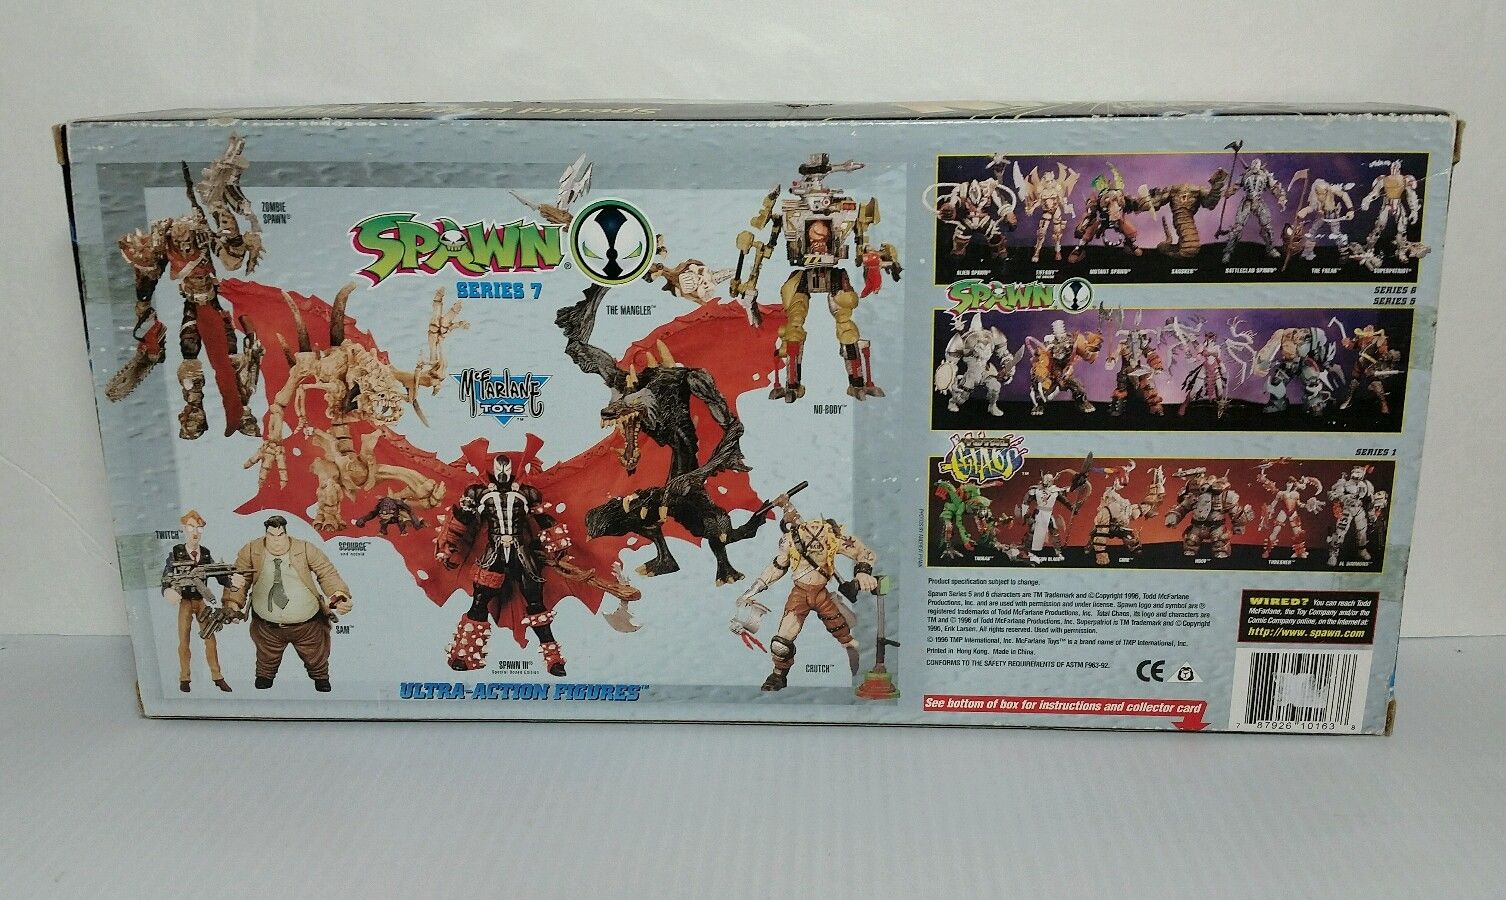 SPECIAL EDITION 6" INCH SPAWN III ca.16 cm ULTRA ACTIONFIGURE McFARLANE 